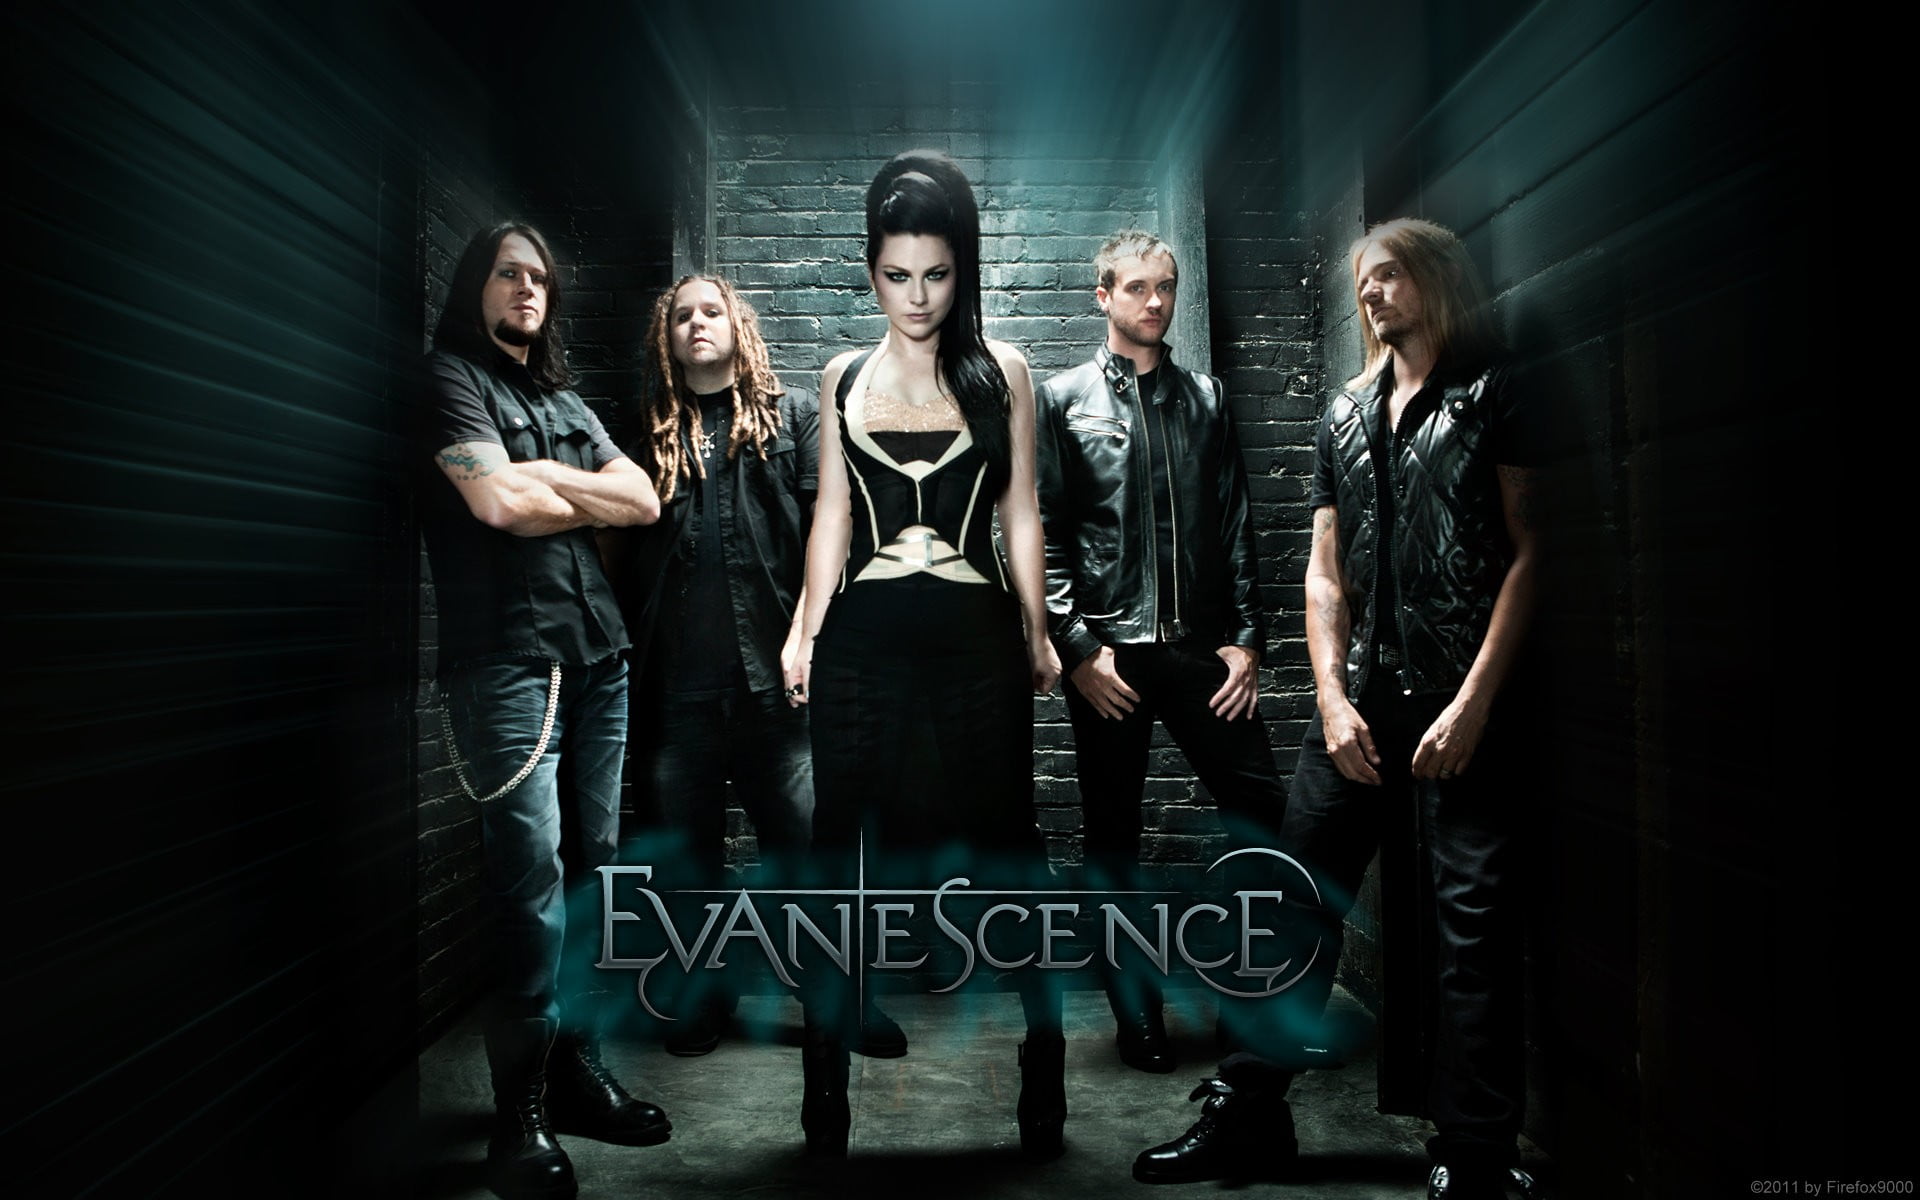 amy, evanescence, lee, young adult, group of people, young women